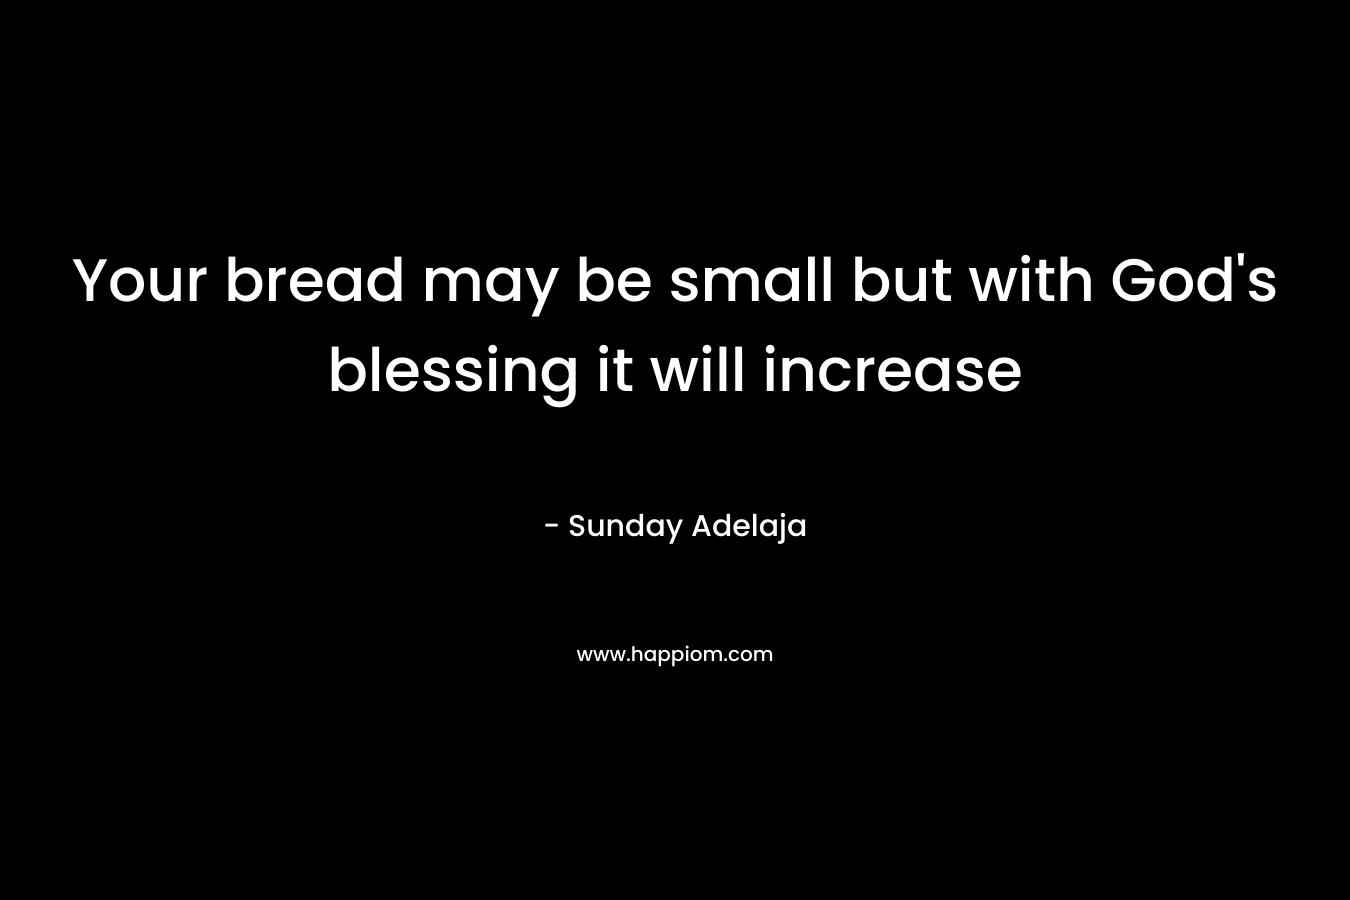 Your bread may be small but with God's blessing it will increase